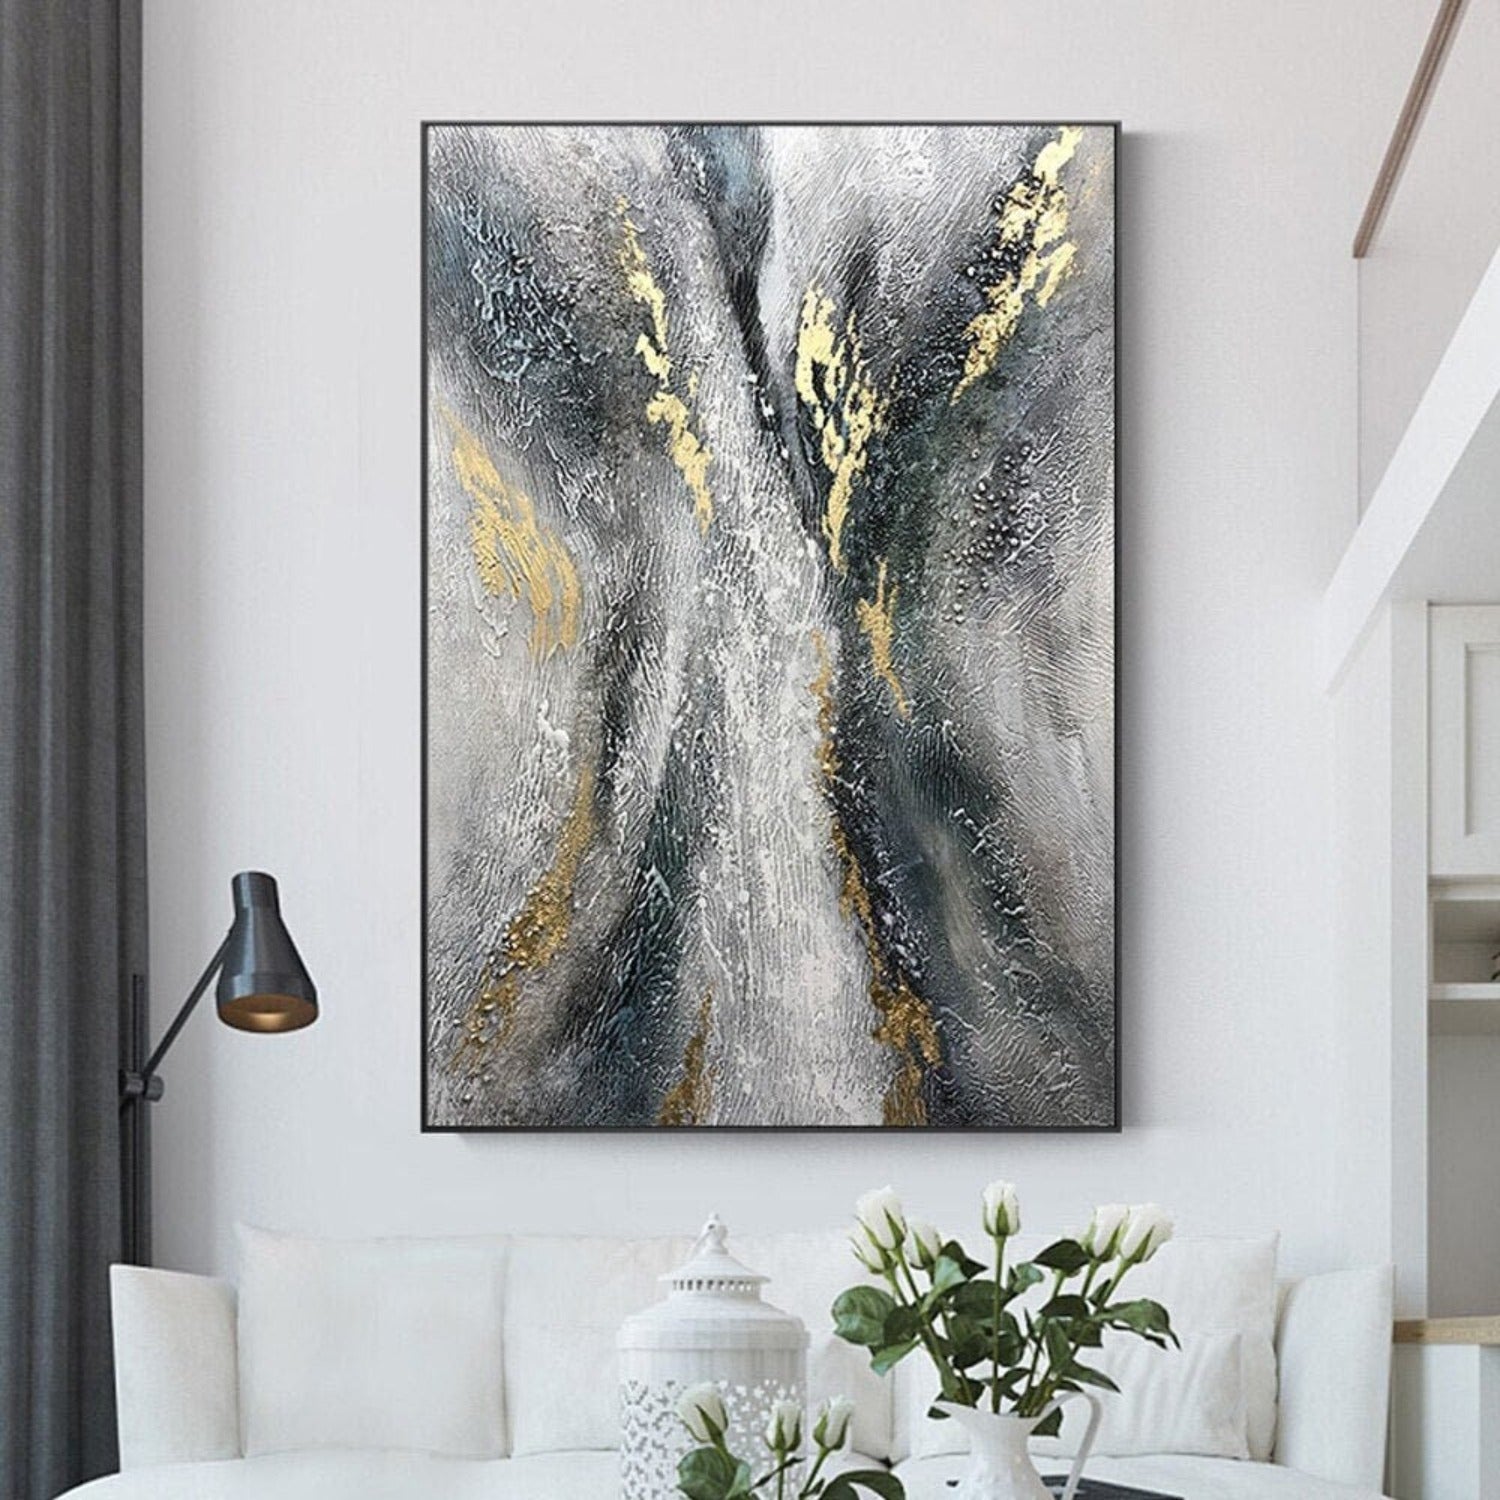 Textured Crossroads 100% Hand Painted Abstract Art